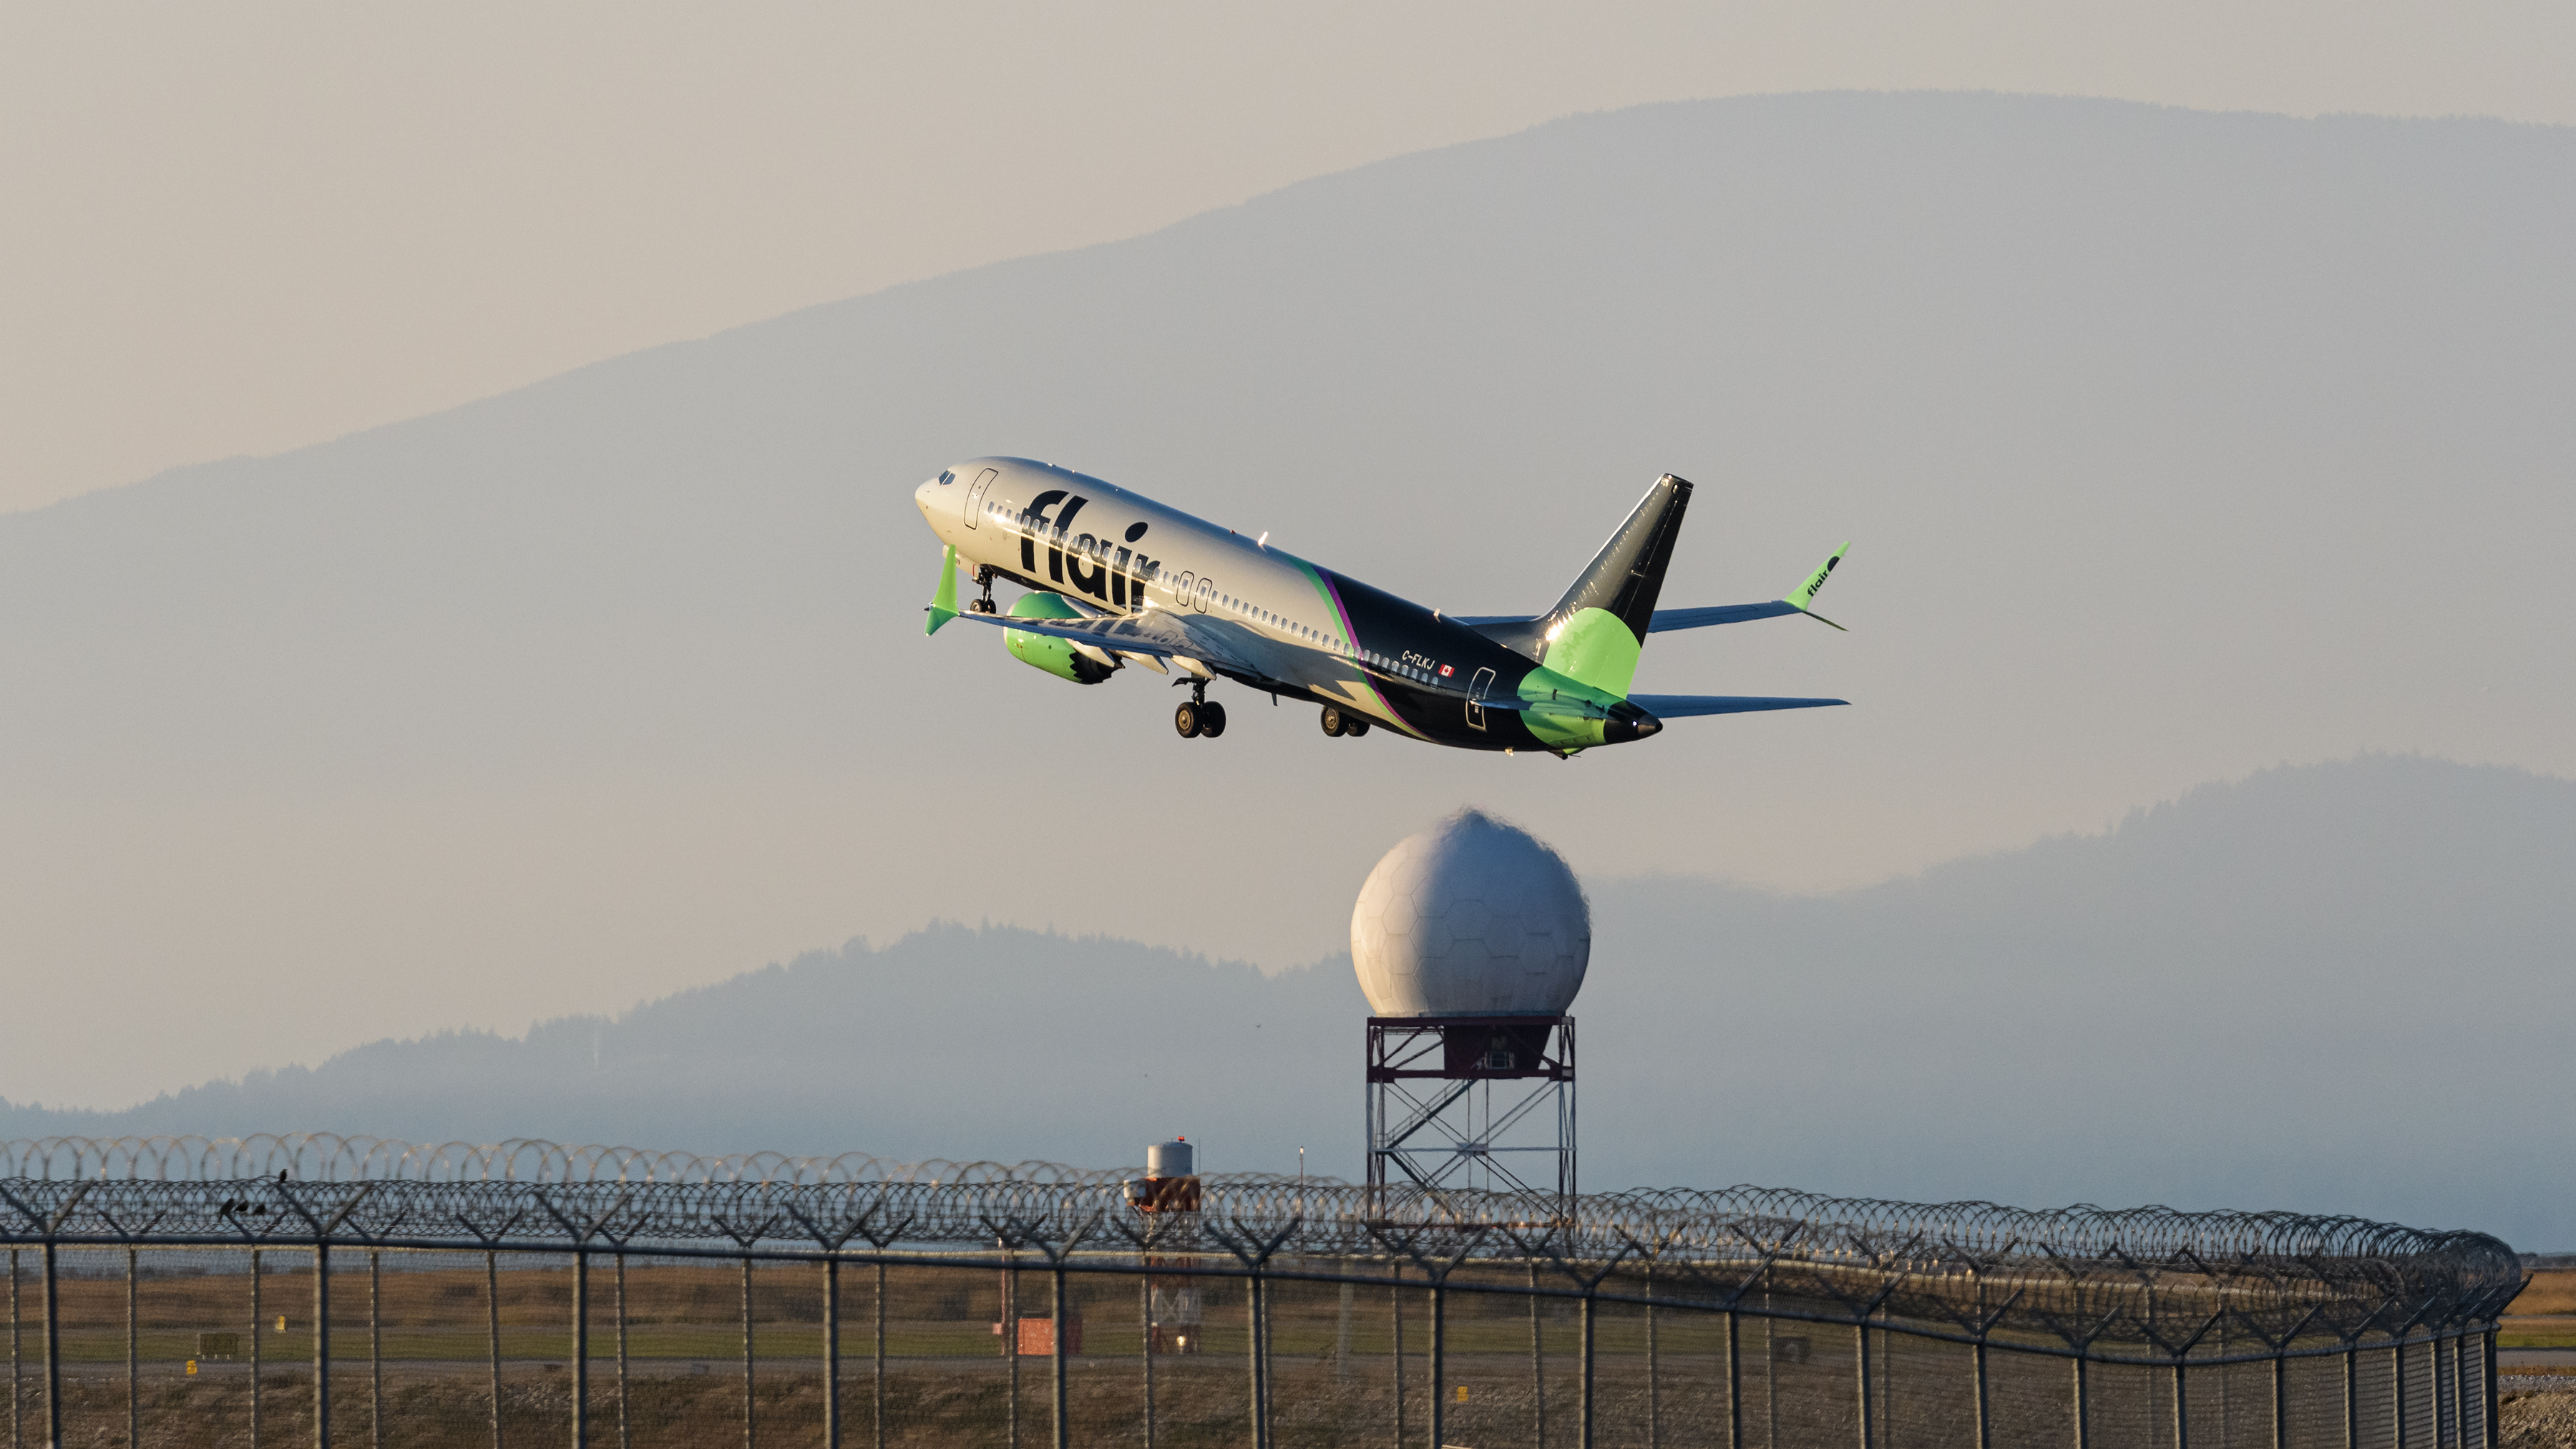 Flair Airlines is now Canada’s lone low-cost carrier. Can it rise to the moment?